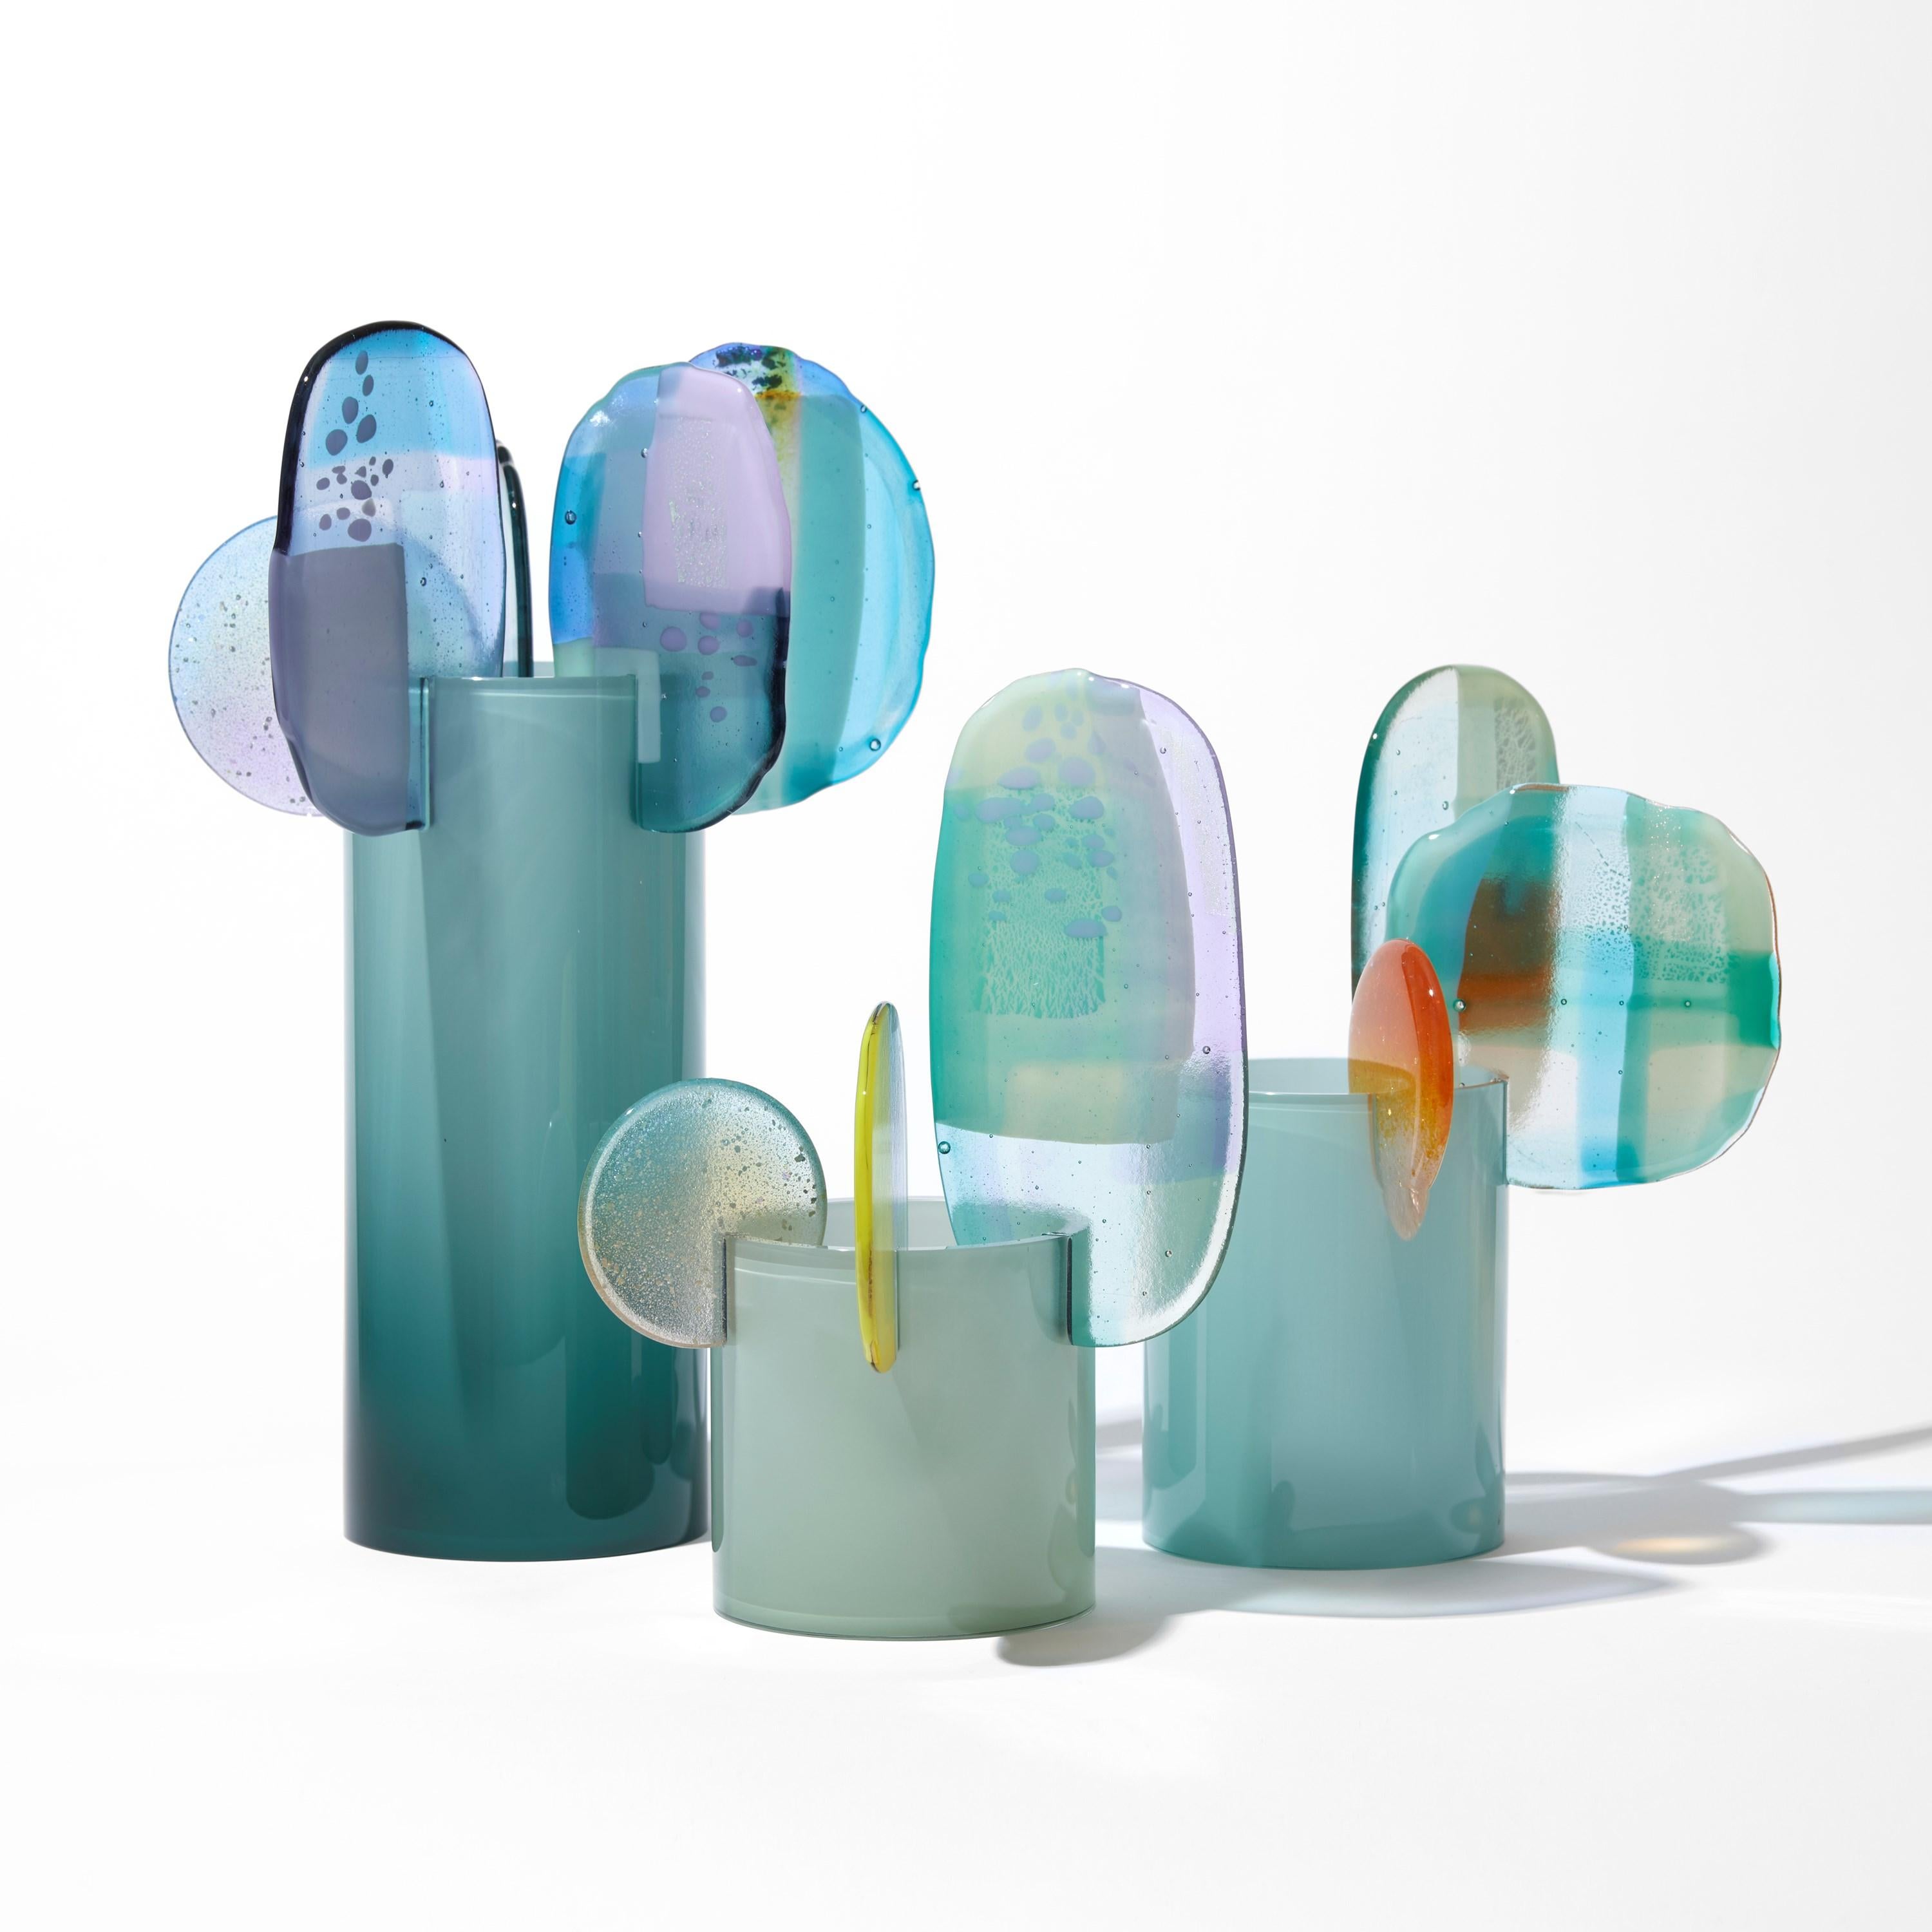 Cut Glass Paradise 08 in Jadeite, jade, aqua, blue & lilac glass sculpture by Amy Cushing For Sale